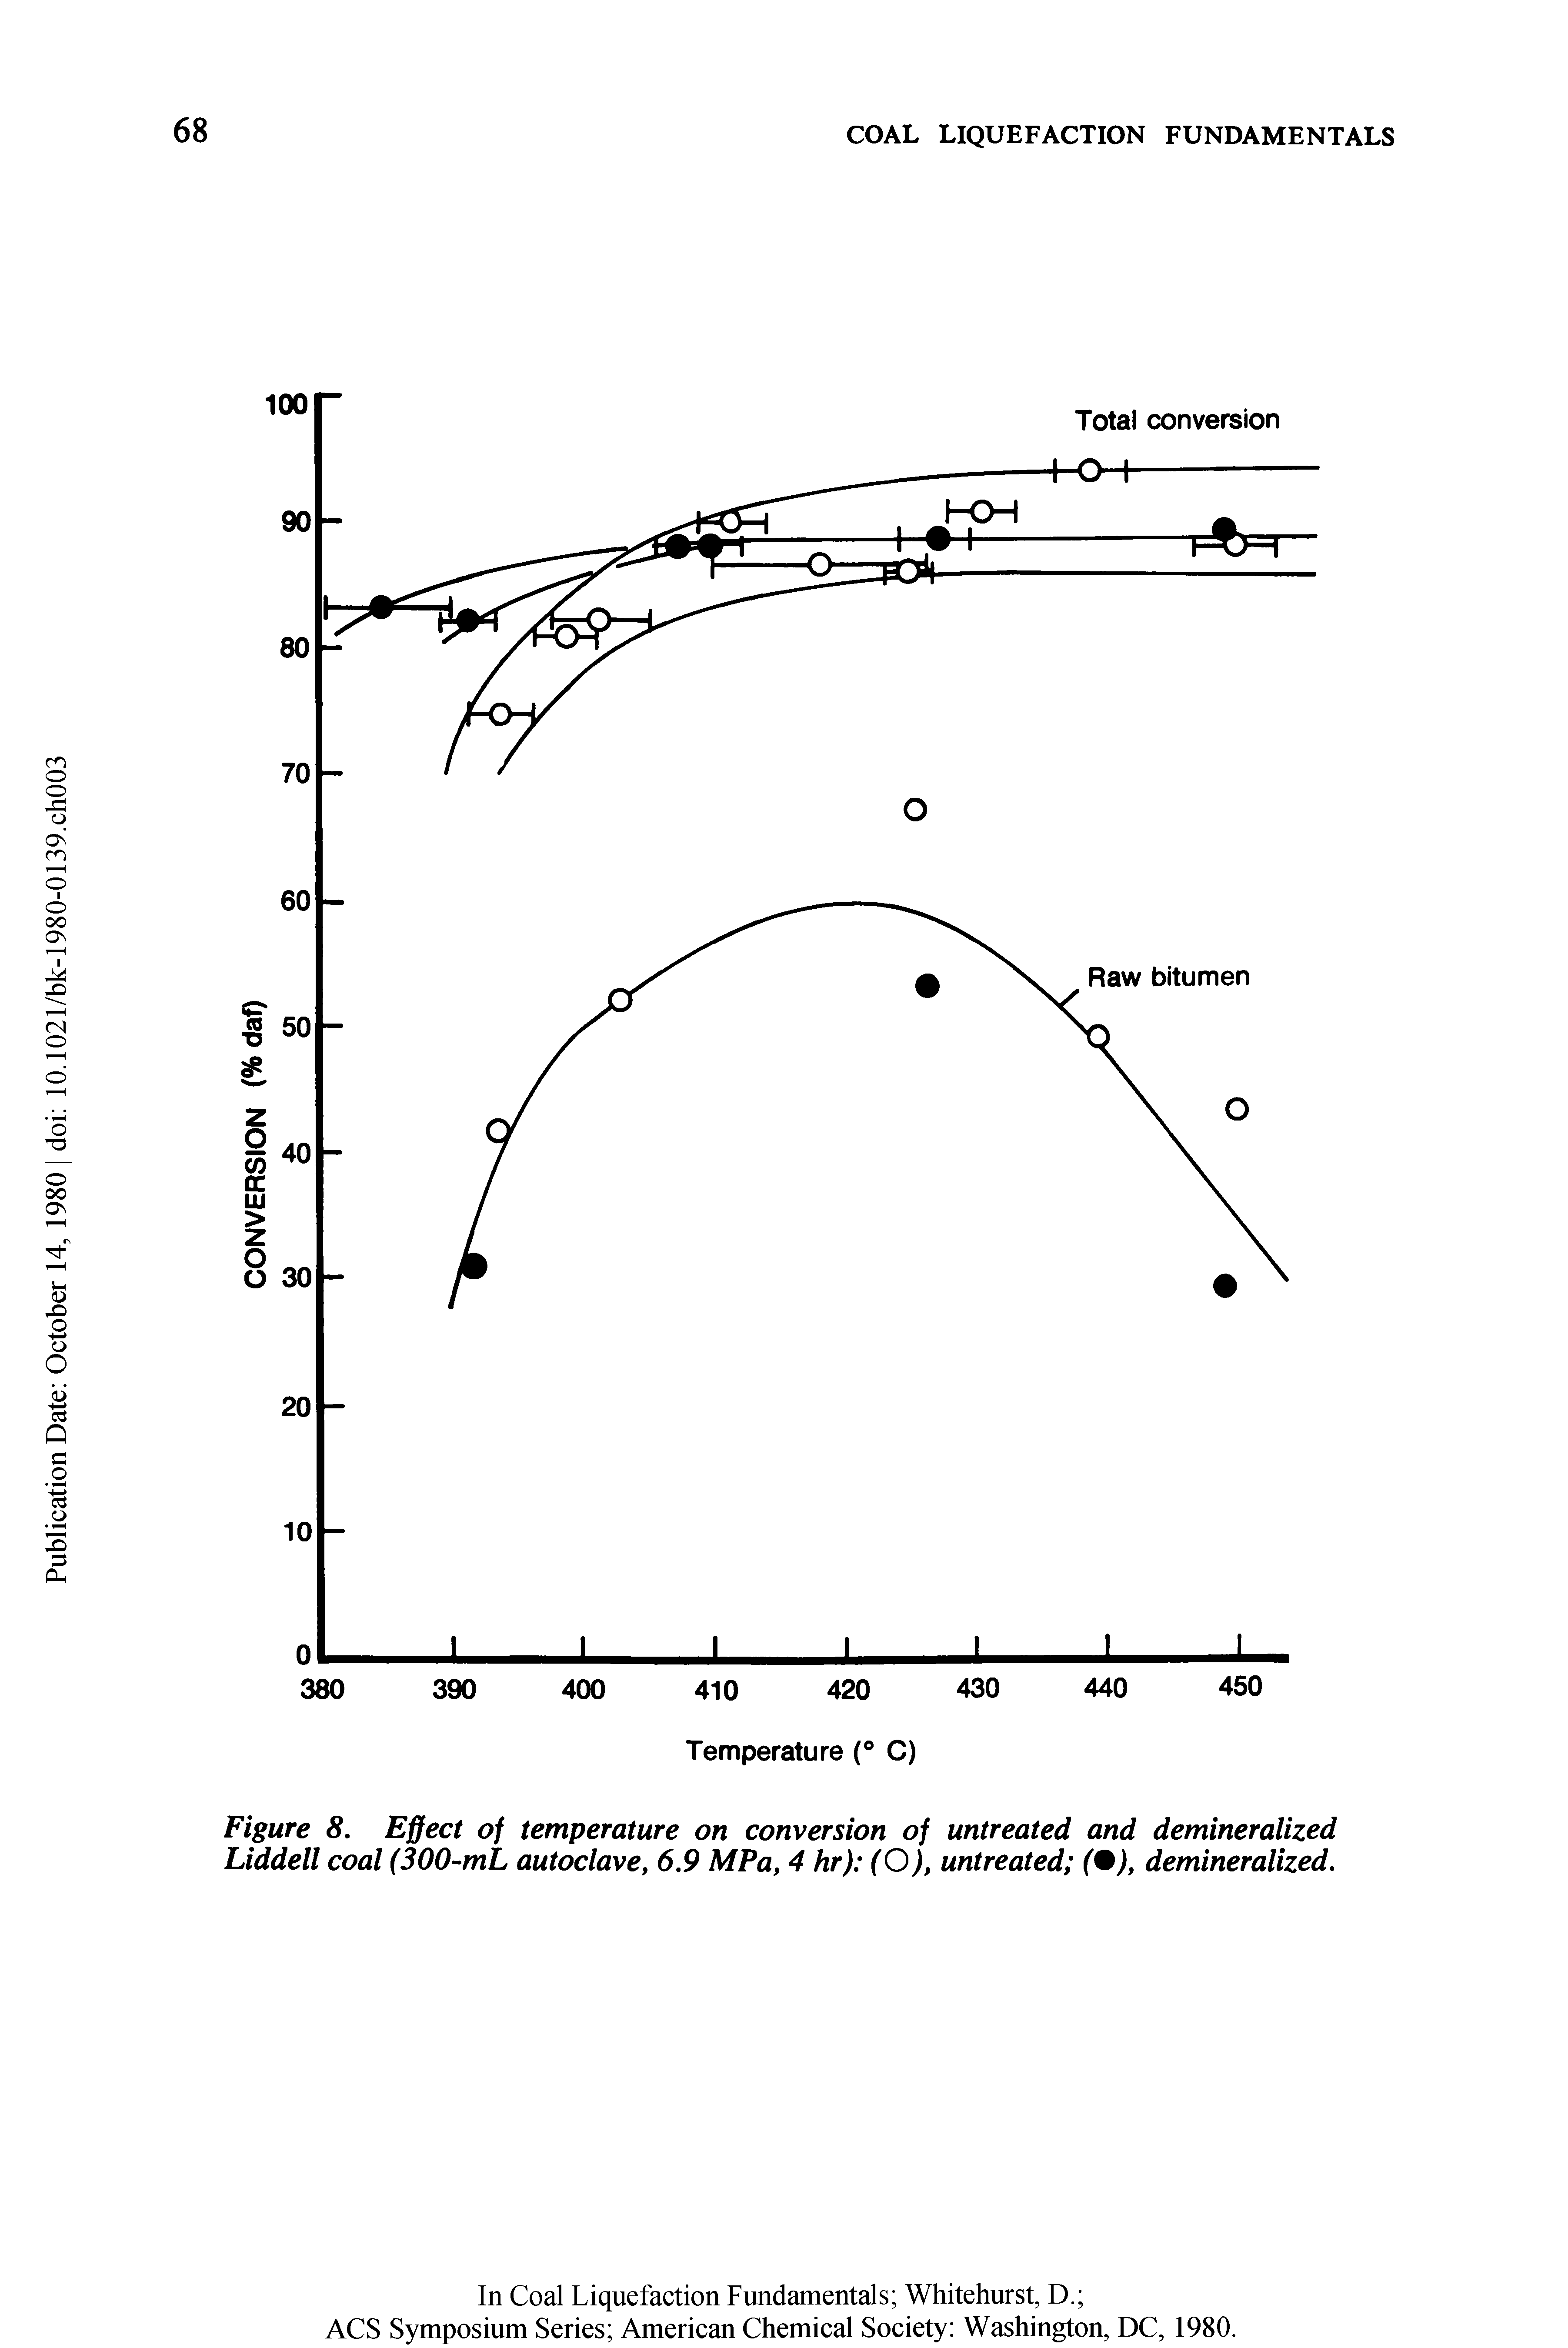 Figure 8. Effect of temperature on conversion of untreated and demineralized Liddell coal (300-mL autoclave, 6.9 MPa, 4 hr) (O), untreated (%), demineralized.